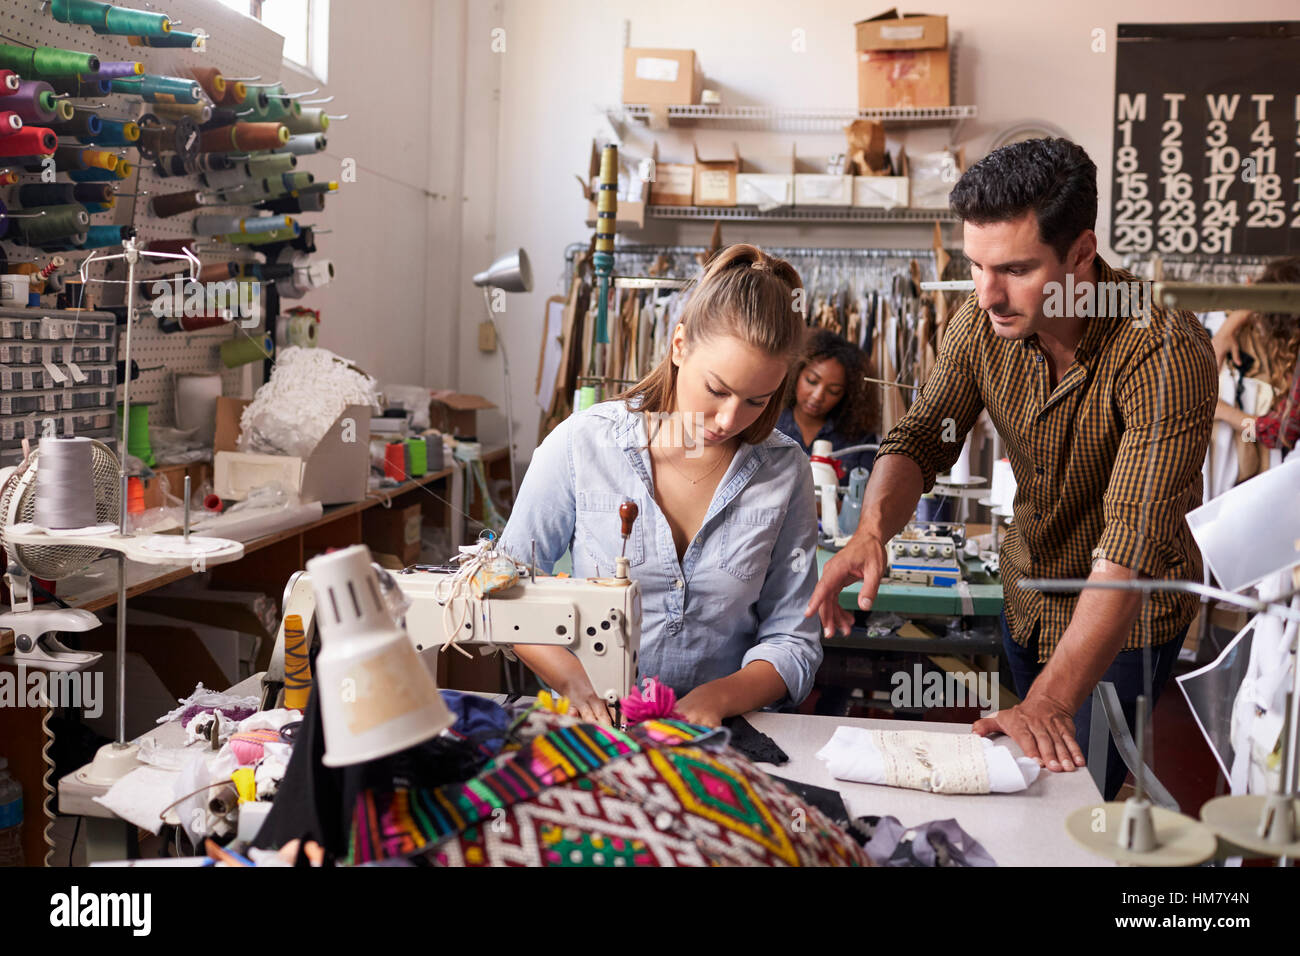 Manager instructing machinist at a clothing design studio Stock Photo